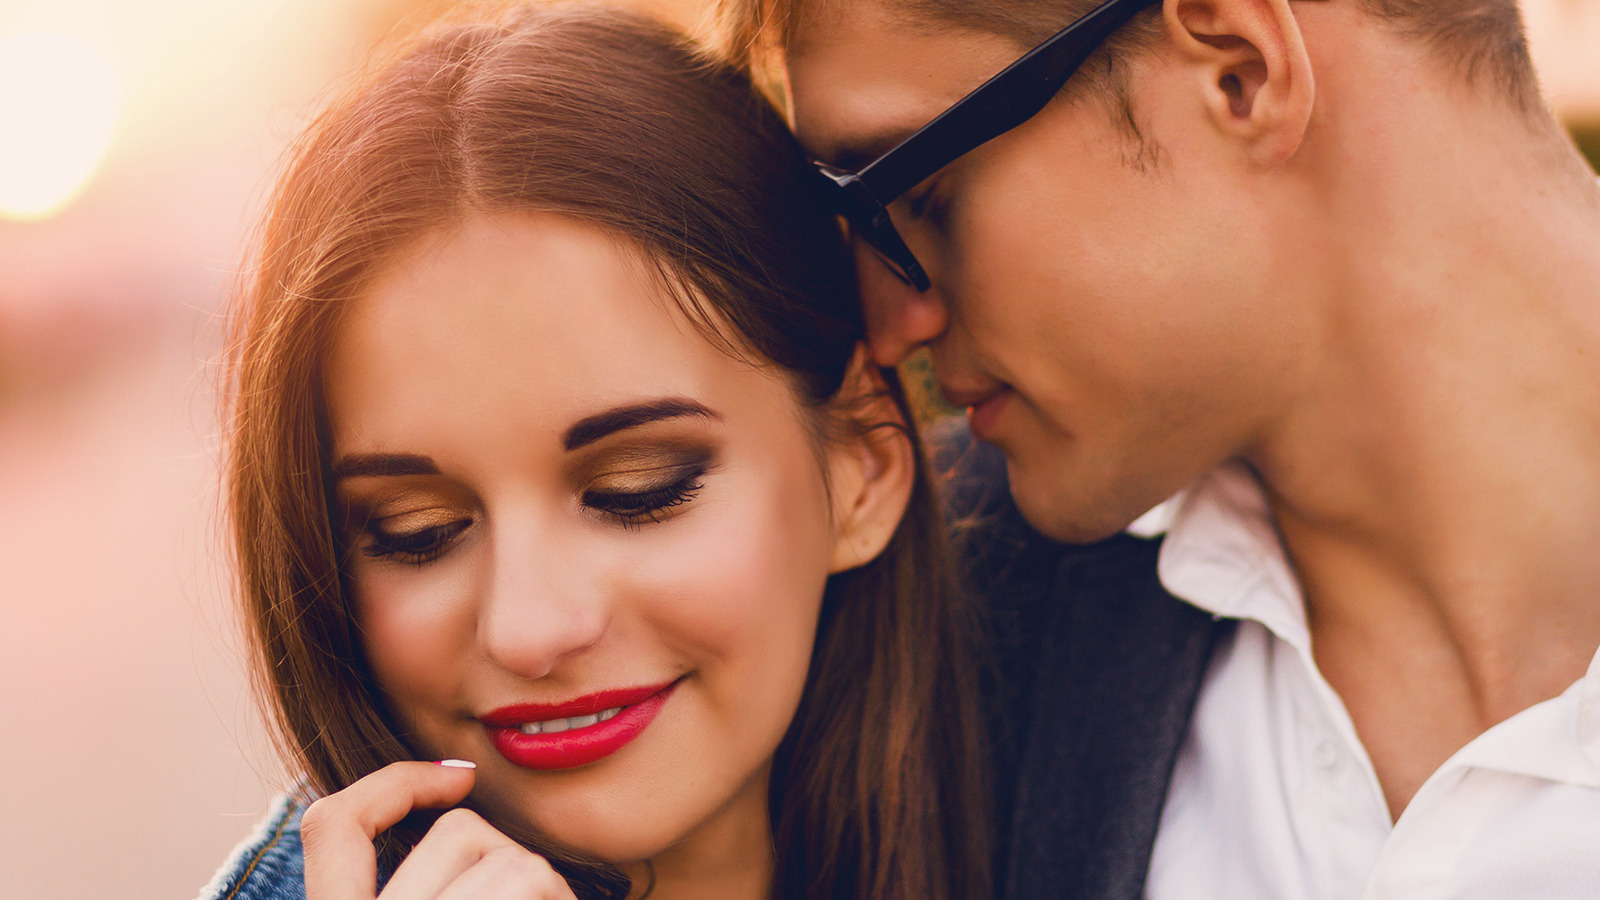 What Will My First Kiss Feel Like? 10 Things to Expect - PairedLife